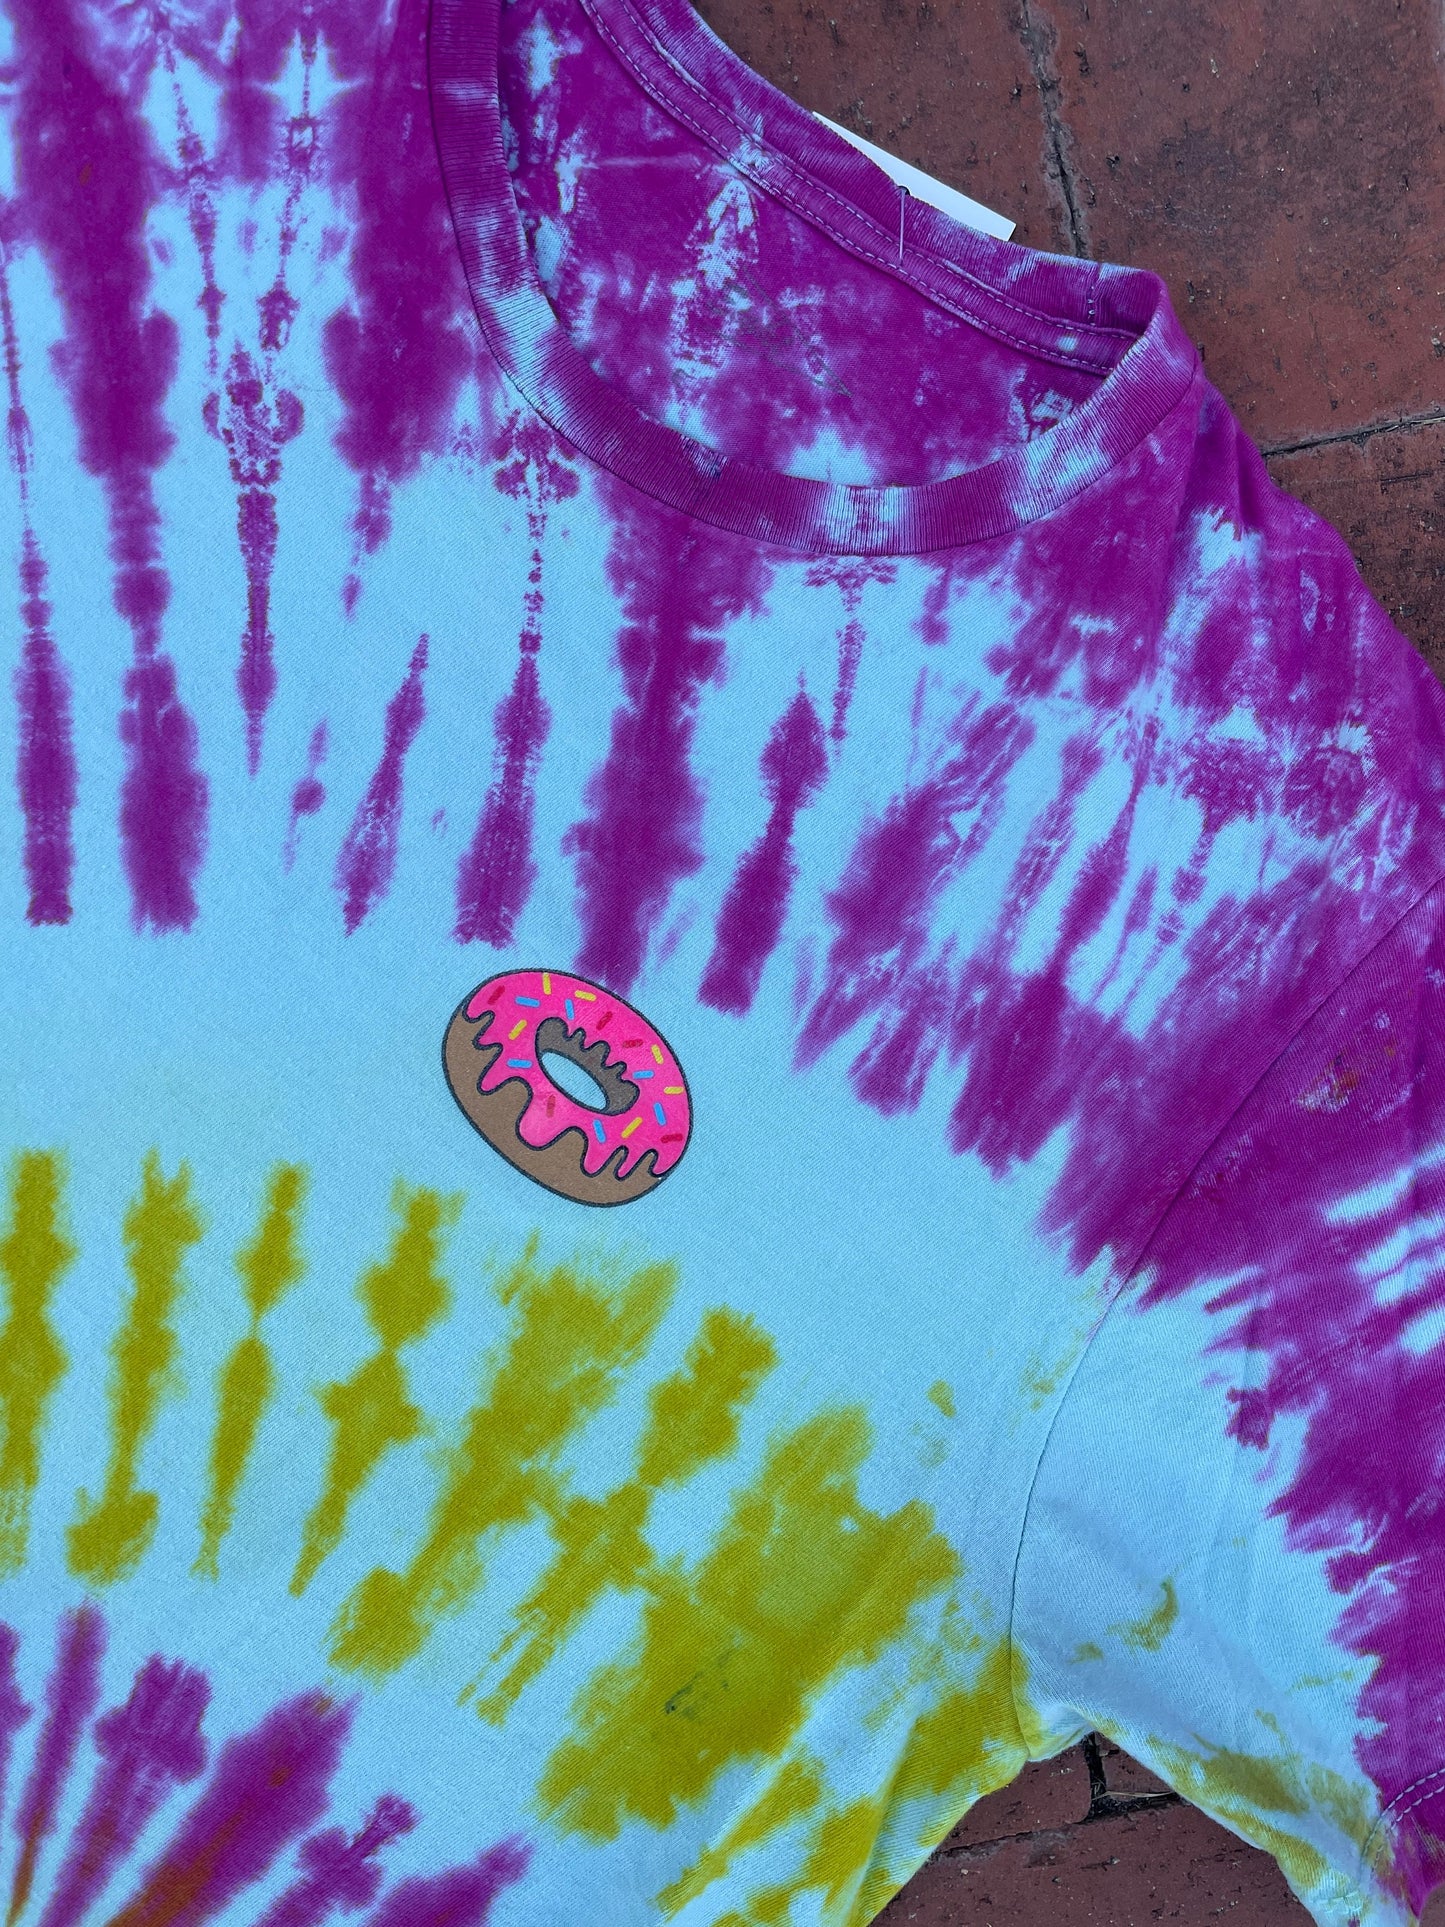 LARGE Men’s Donut Spiral Tie Dye Short Sleeve T-Shirt | One-Of-a-Kind Upcycled Pink and Yellow Top